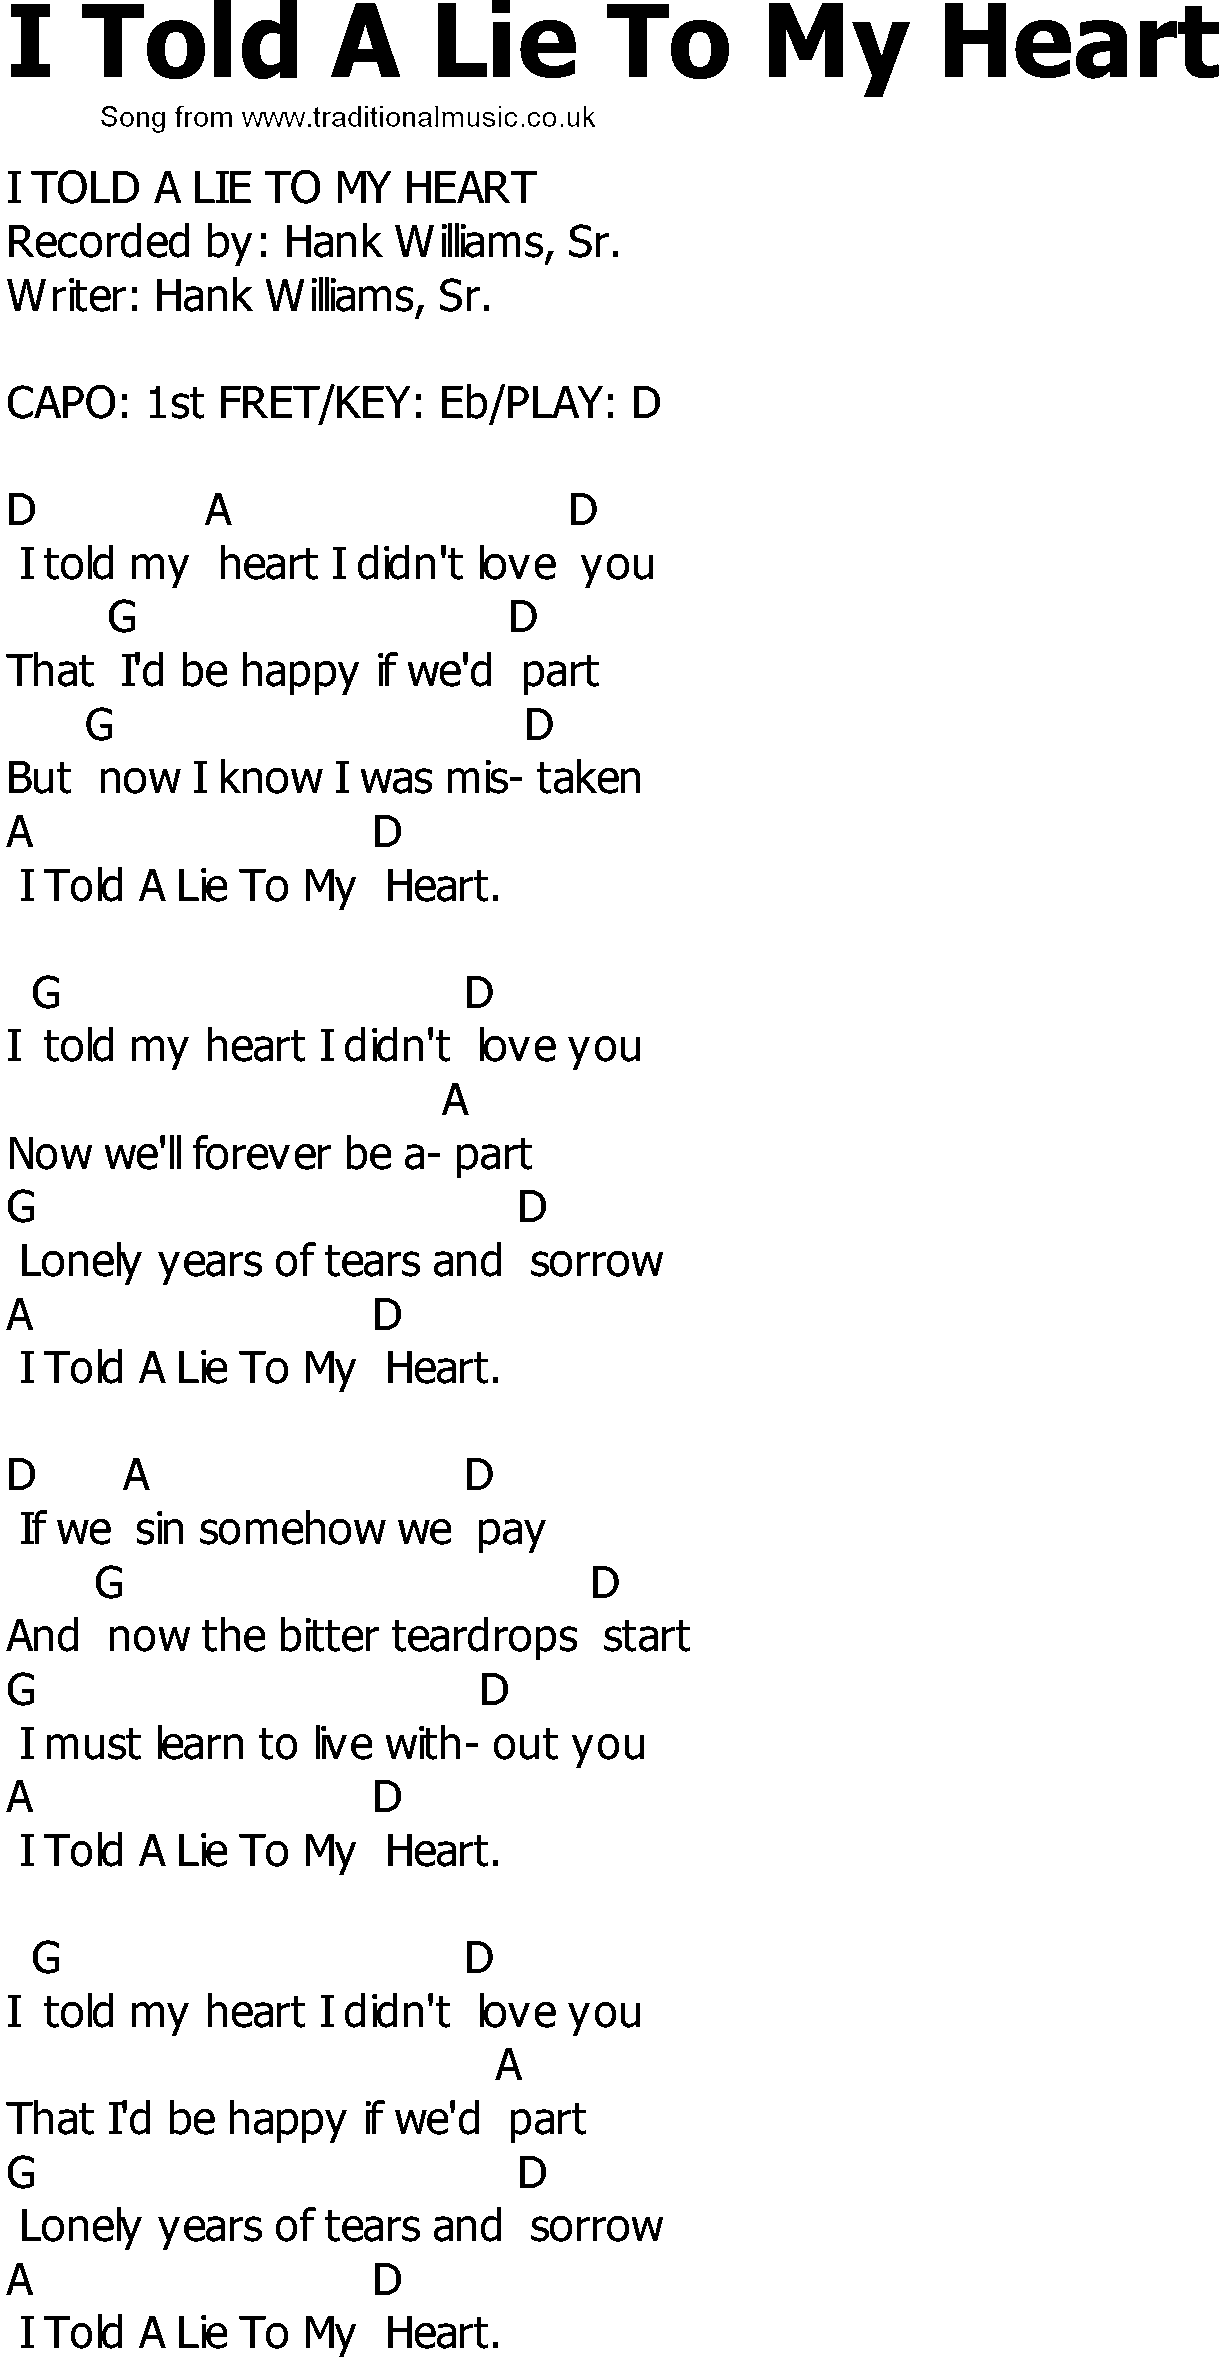 Old Country song lyrics with chords - I Told A Lie To My Heart